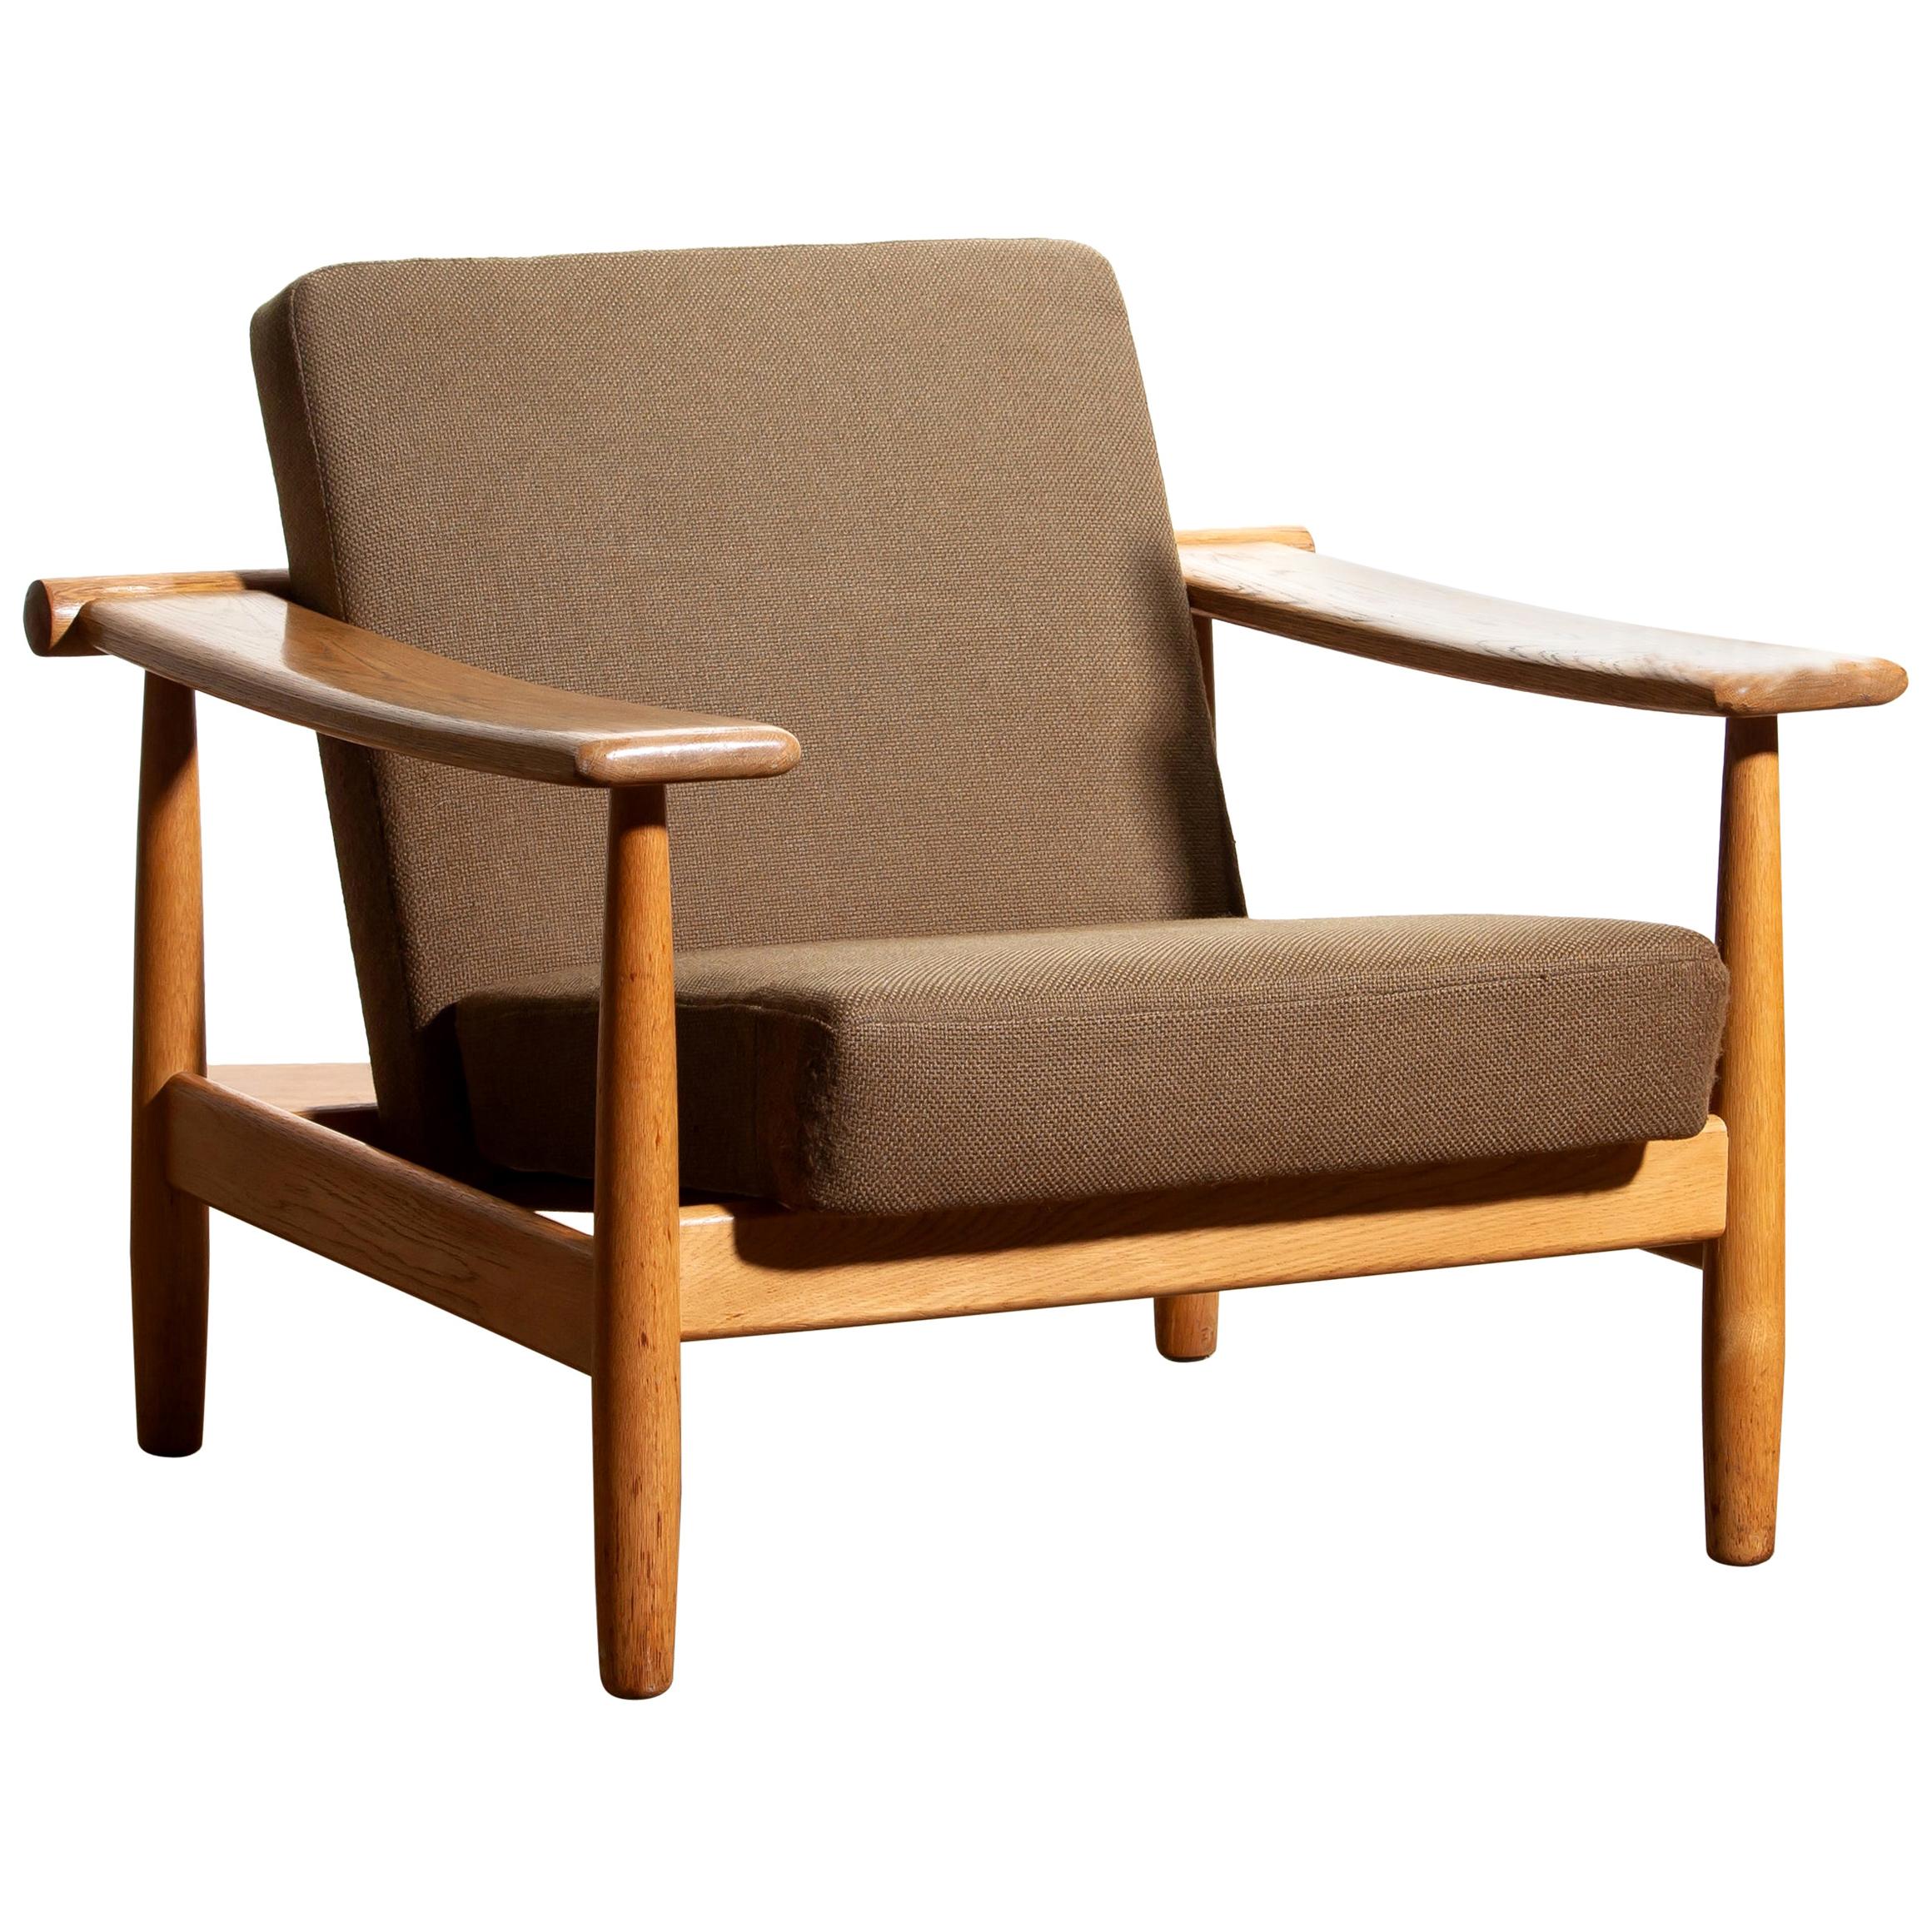 Beautiful oak lounge chair from the 1960s made in Denmark.
The oak frame is in good condition.
The fabric is in fair condition like the pictures shows.



                     